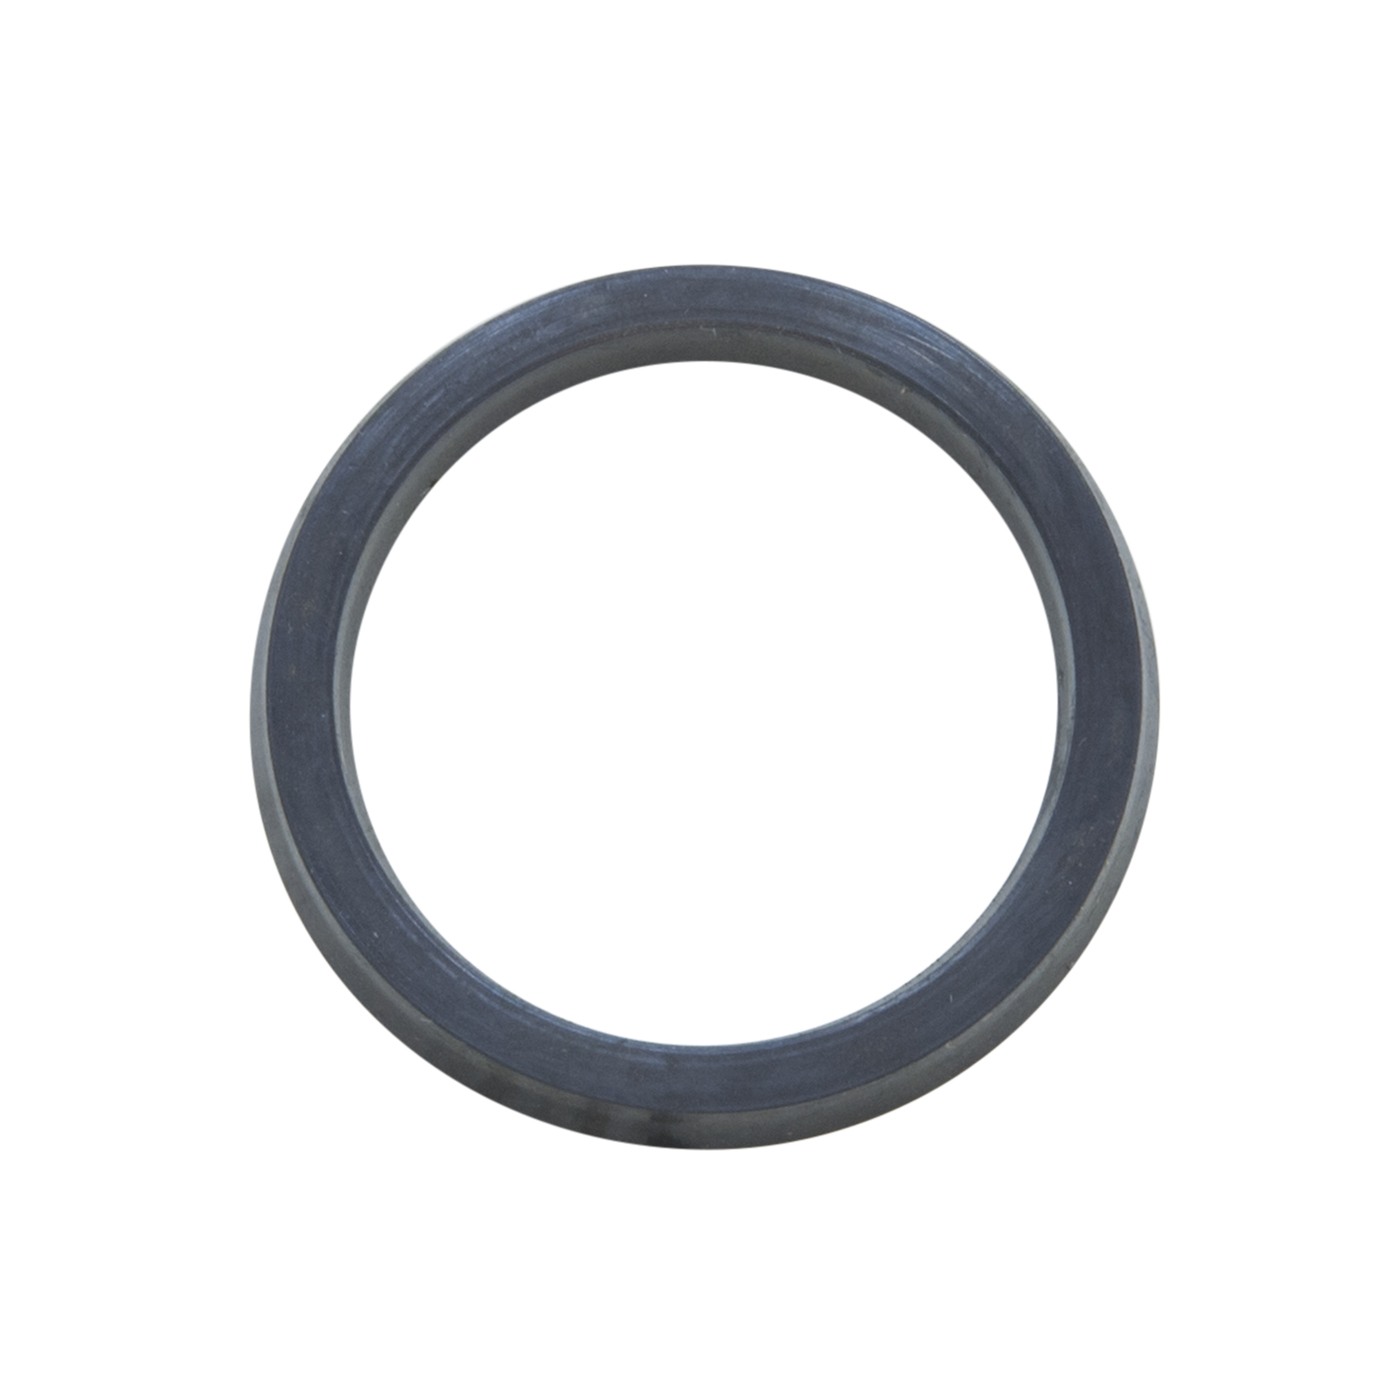 Spindle bearing seal for Dana 30 & 44 